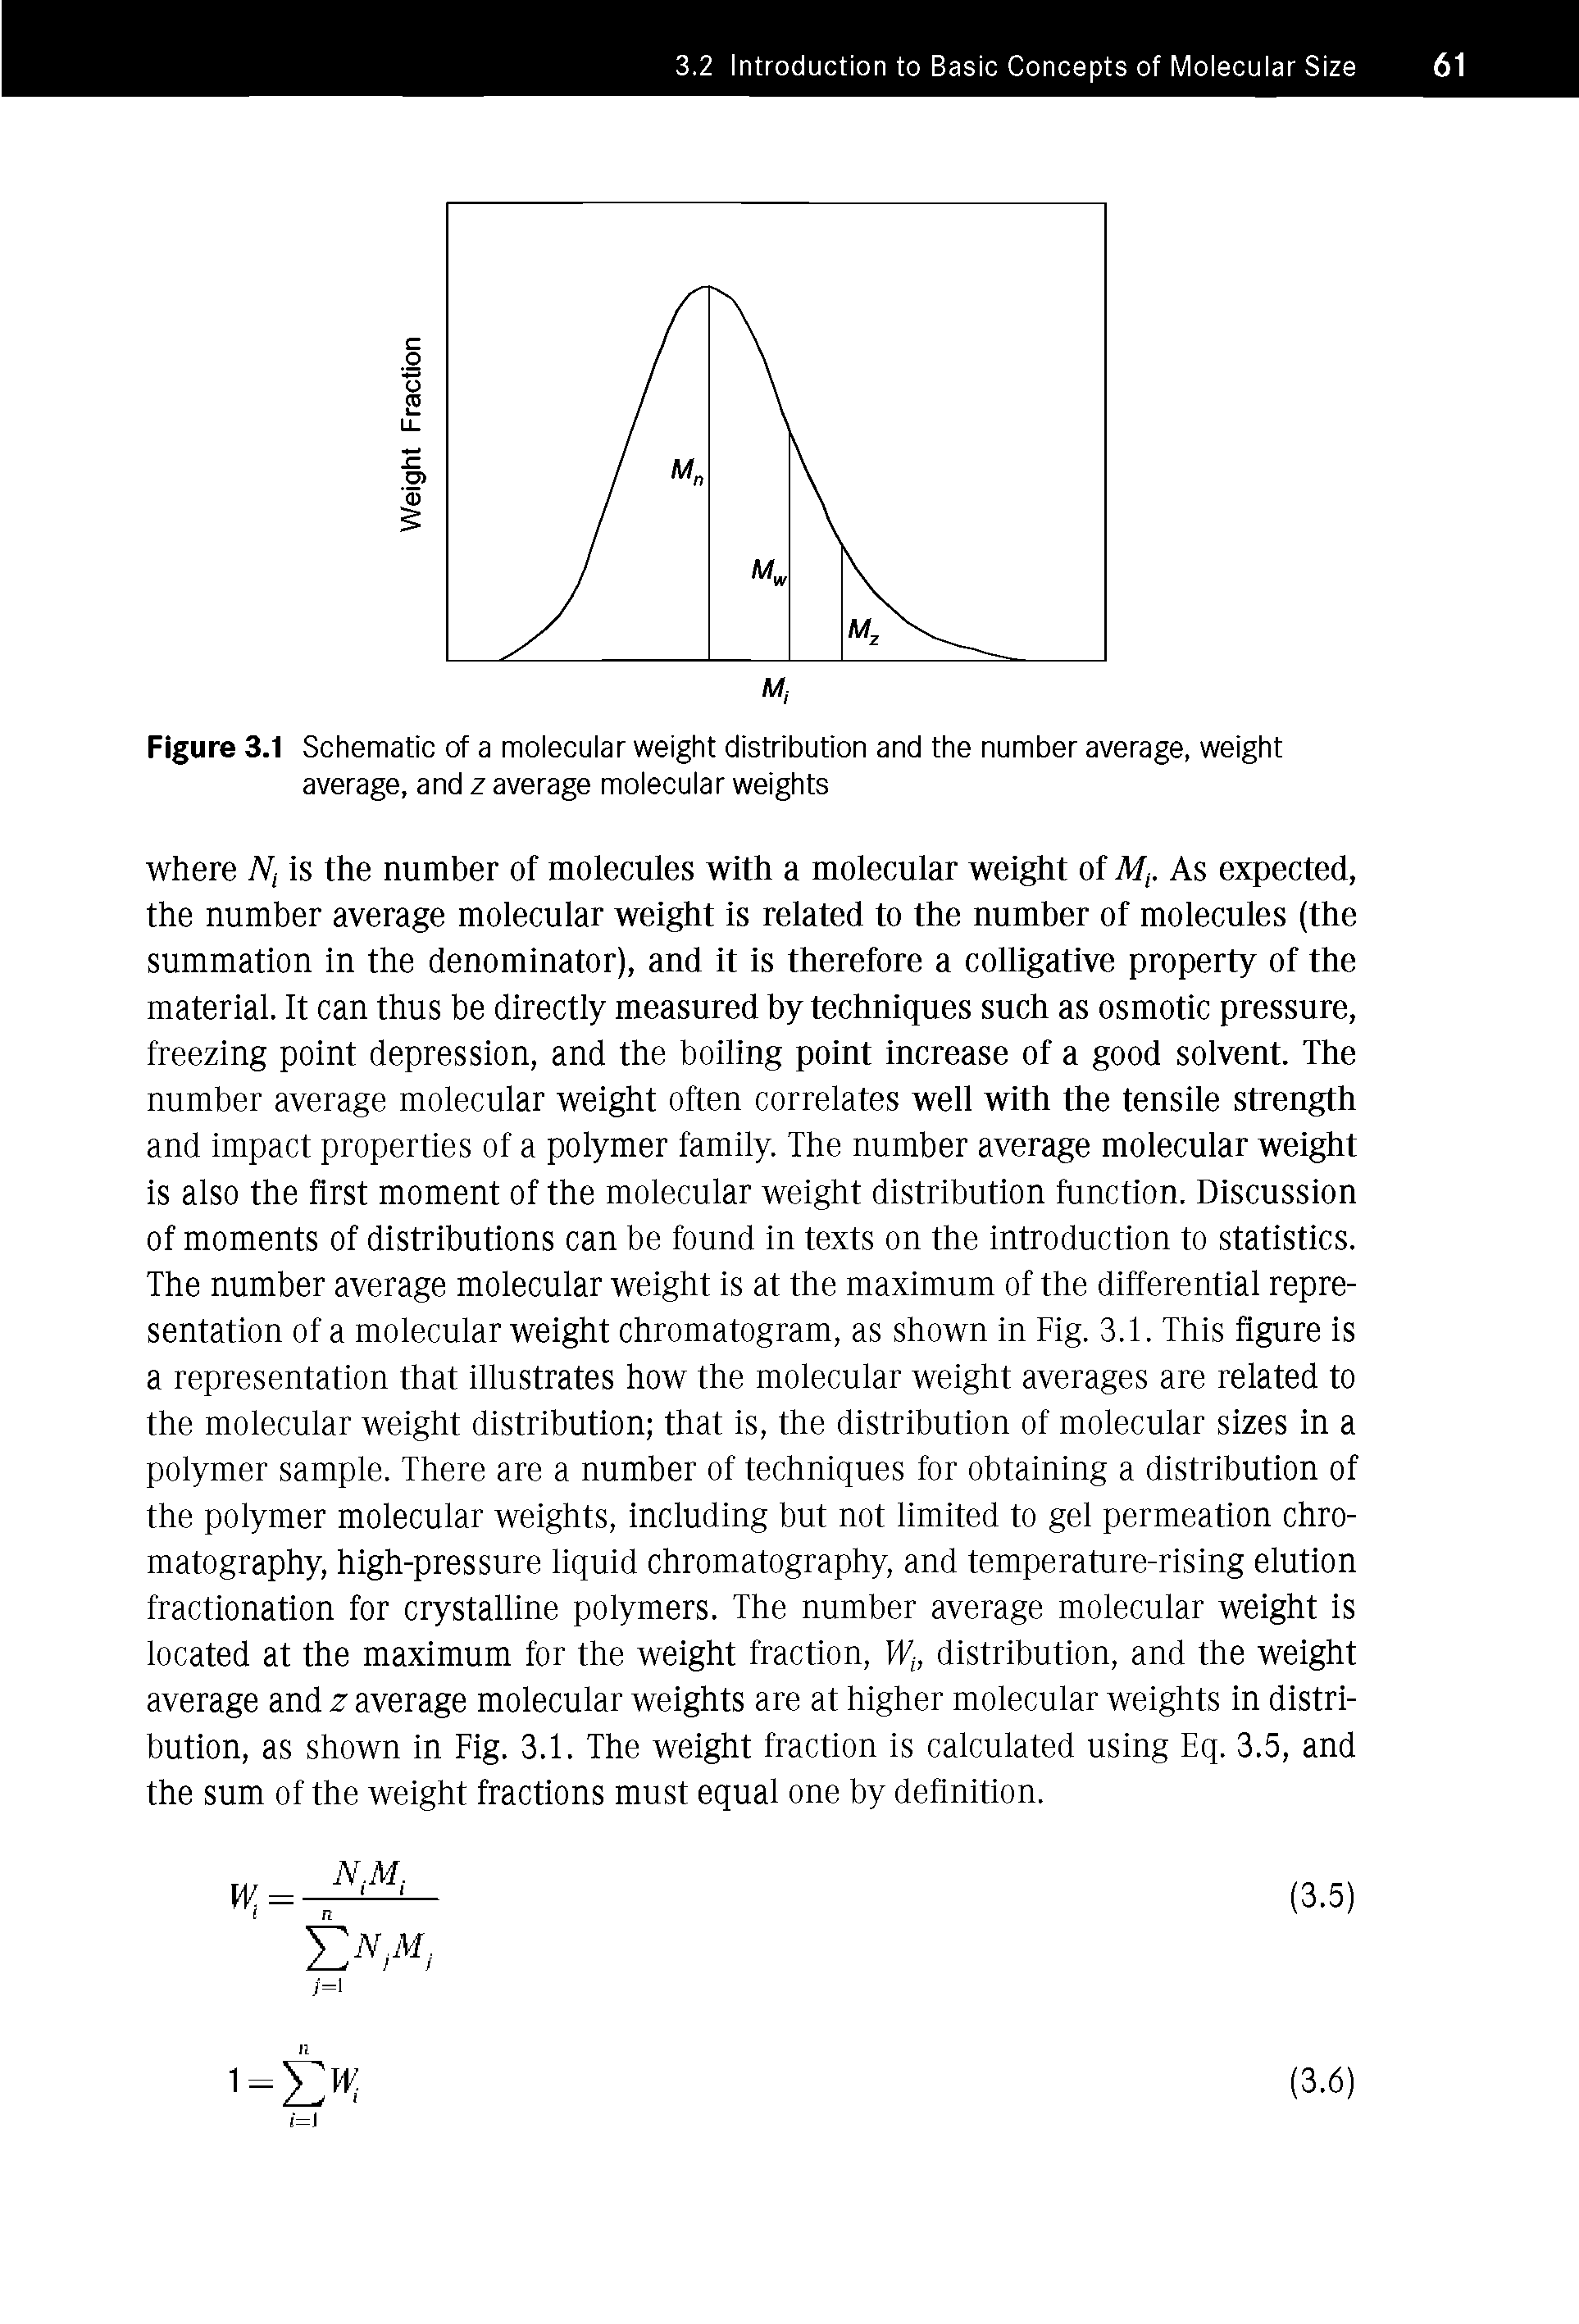 Figure 3.1 Schematic of a molecular weight distribution and the number average, weight average, and z average molecular weights...